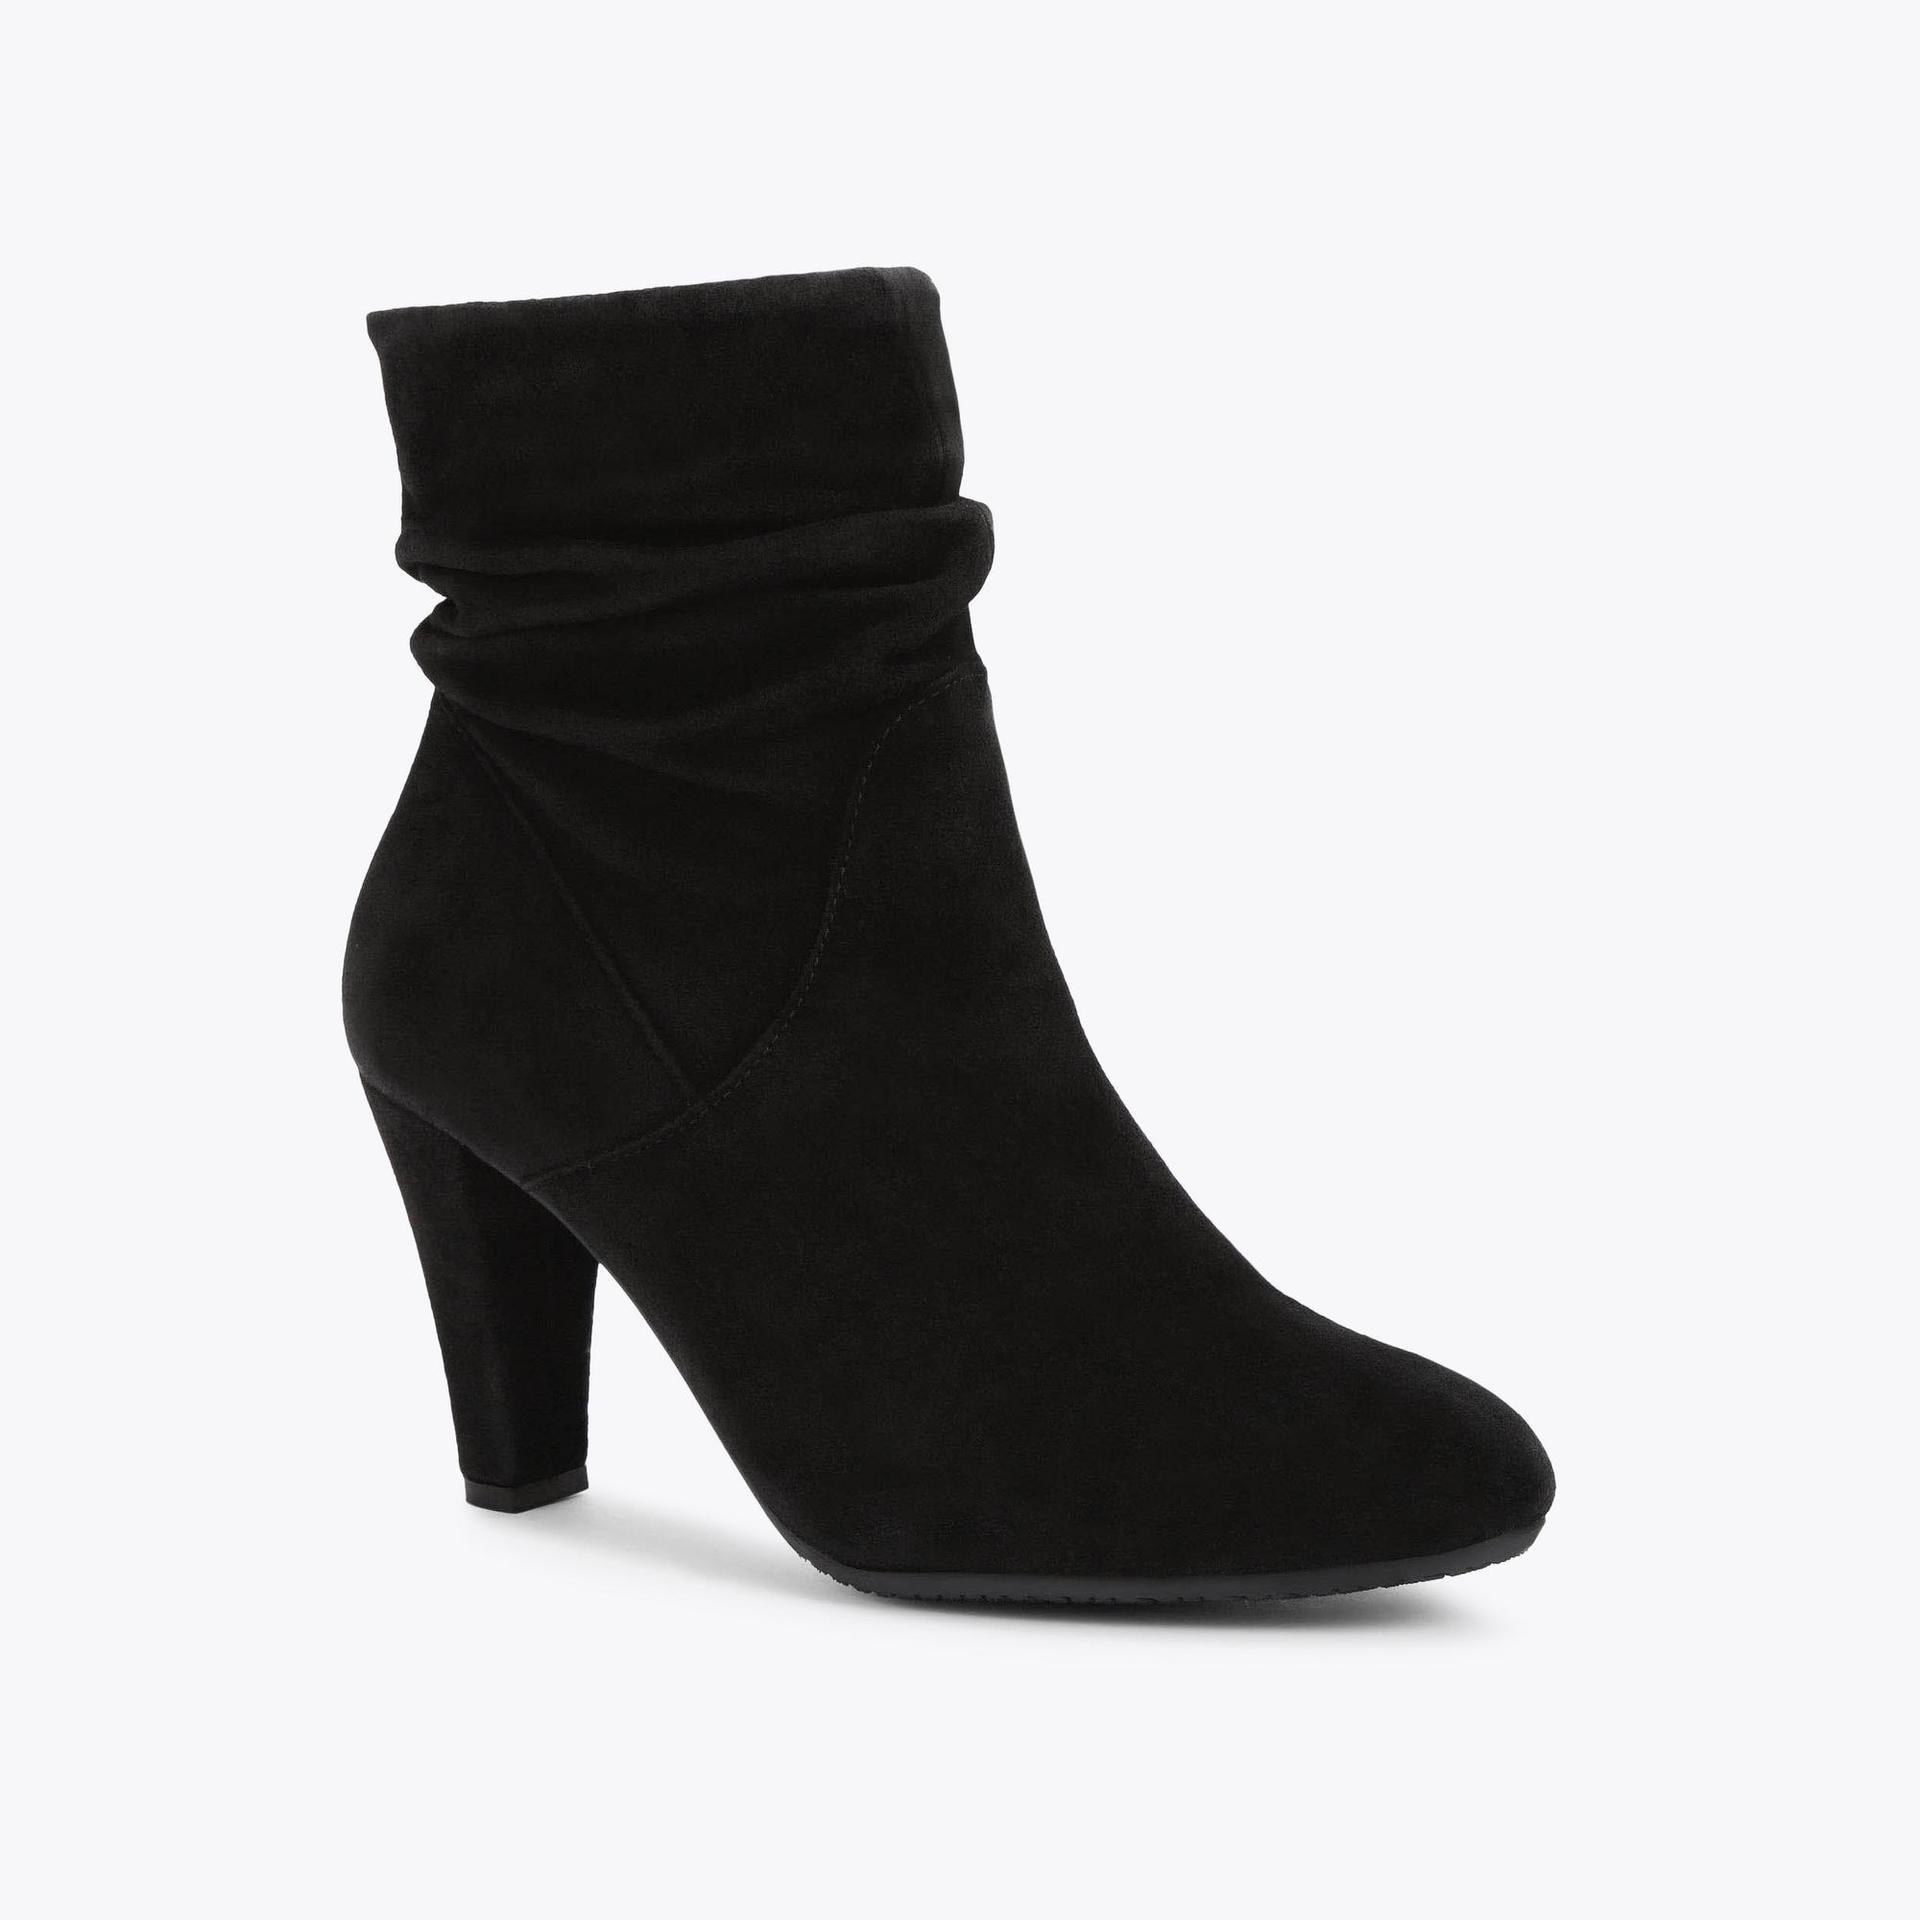 RITA Black Suede Ankle Boots by CARVELA COMFORT